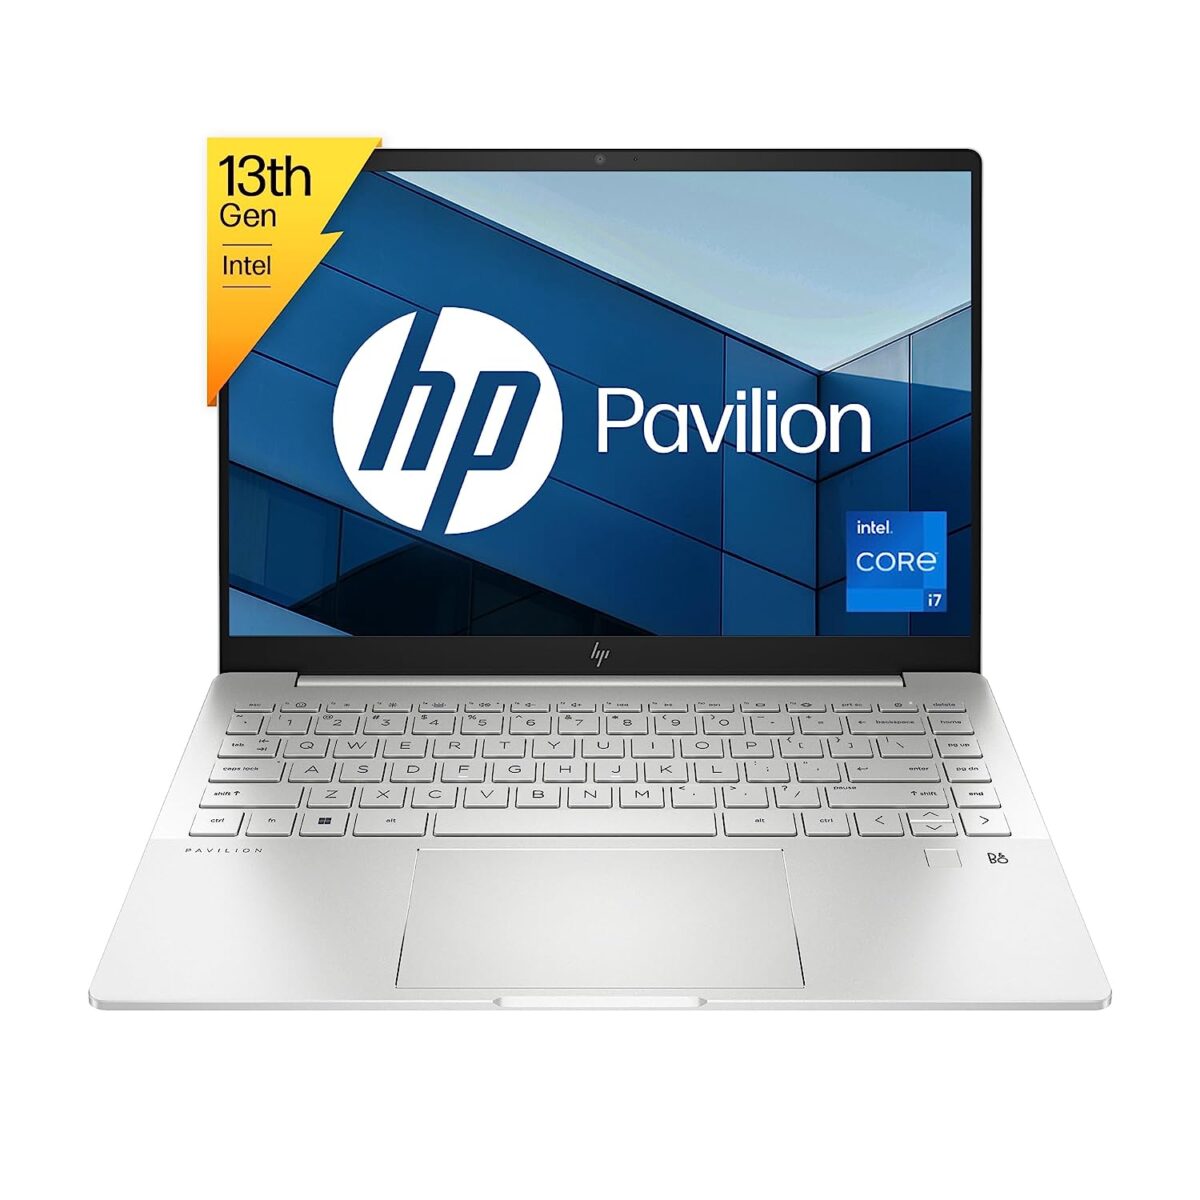 HP Pavilion Plus 14 eh1047TU with 2.8K OLED screen launched in India ( 13th Gen Intel Core i7-13700H )